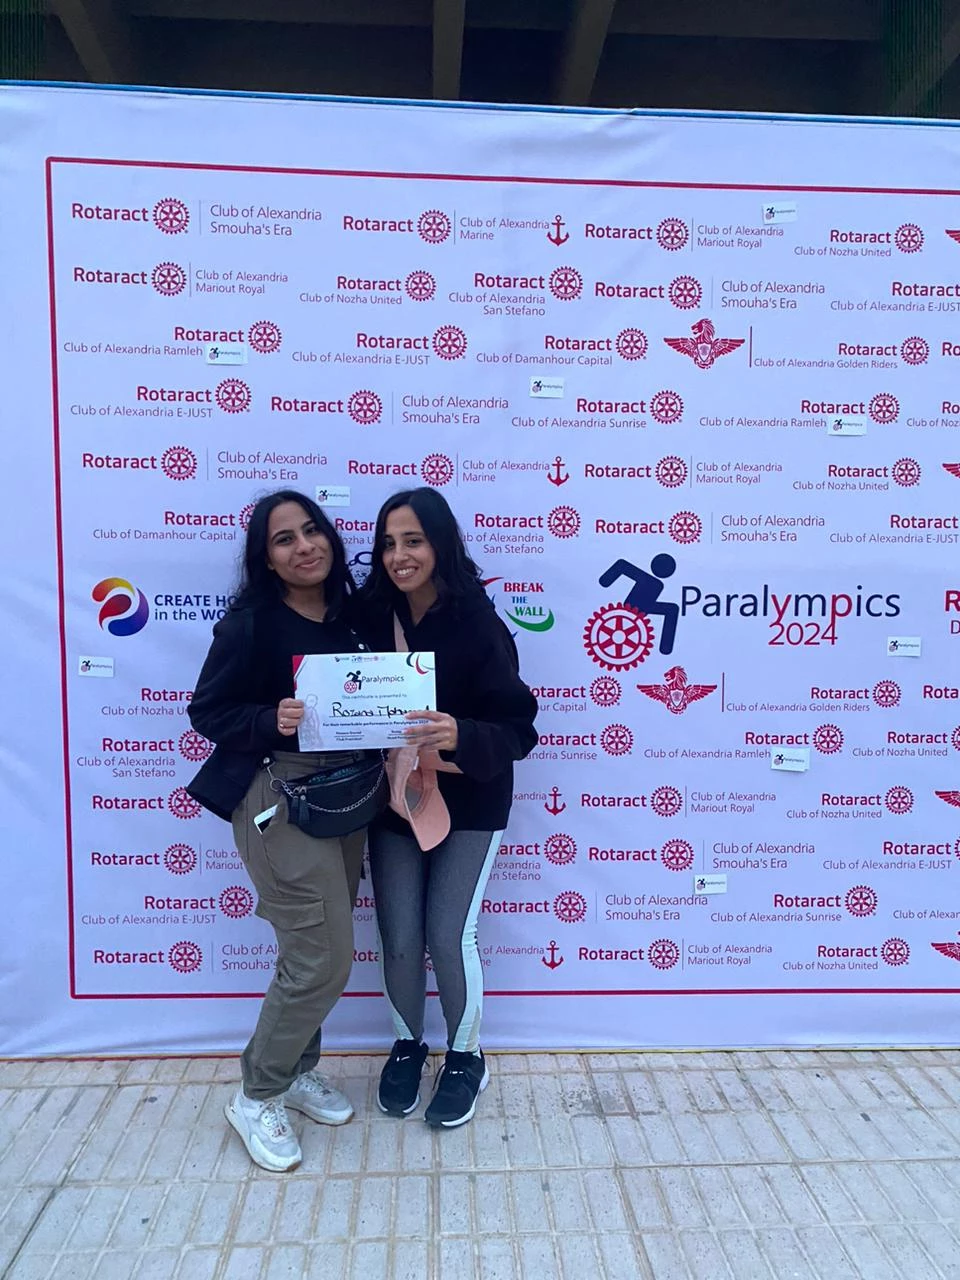 The Rotaract AASTMT family organized the Paralympic Games competition at the Abu Qir Academy Stadiums on: 3/3/20249